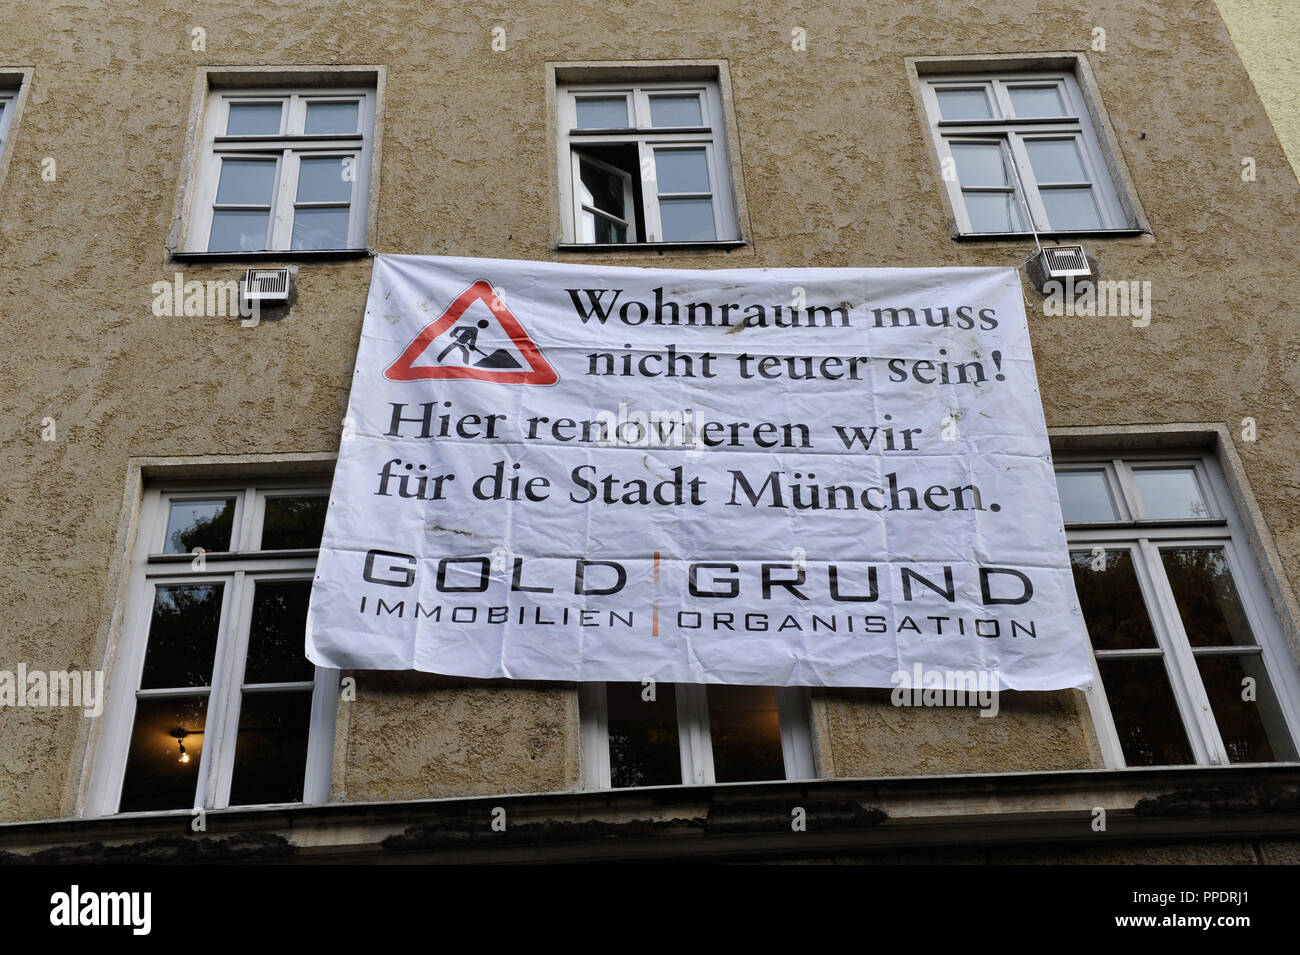 Banner on a symbolically 'occupied' urban house in the Pilotystrasse 8 as part of the Goldgrund campaign for affordable housing. Stock Photo